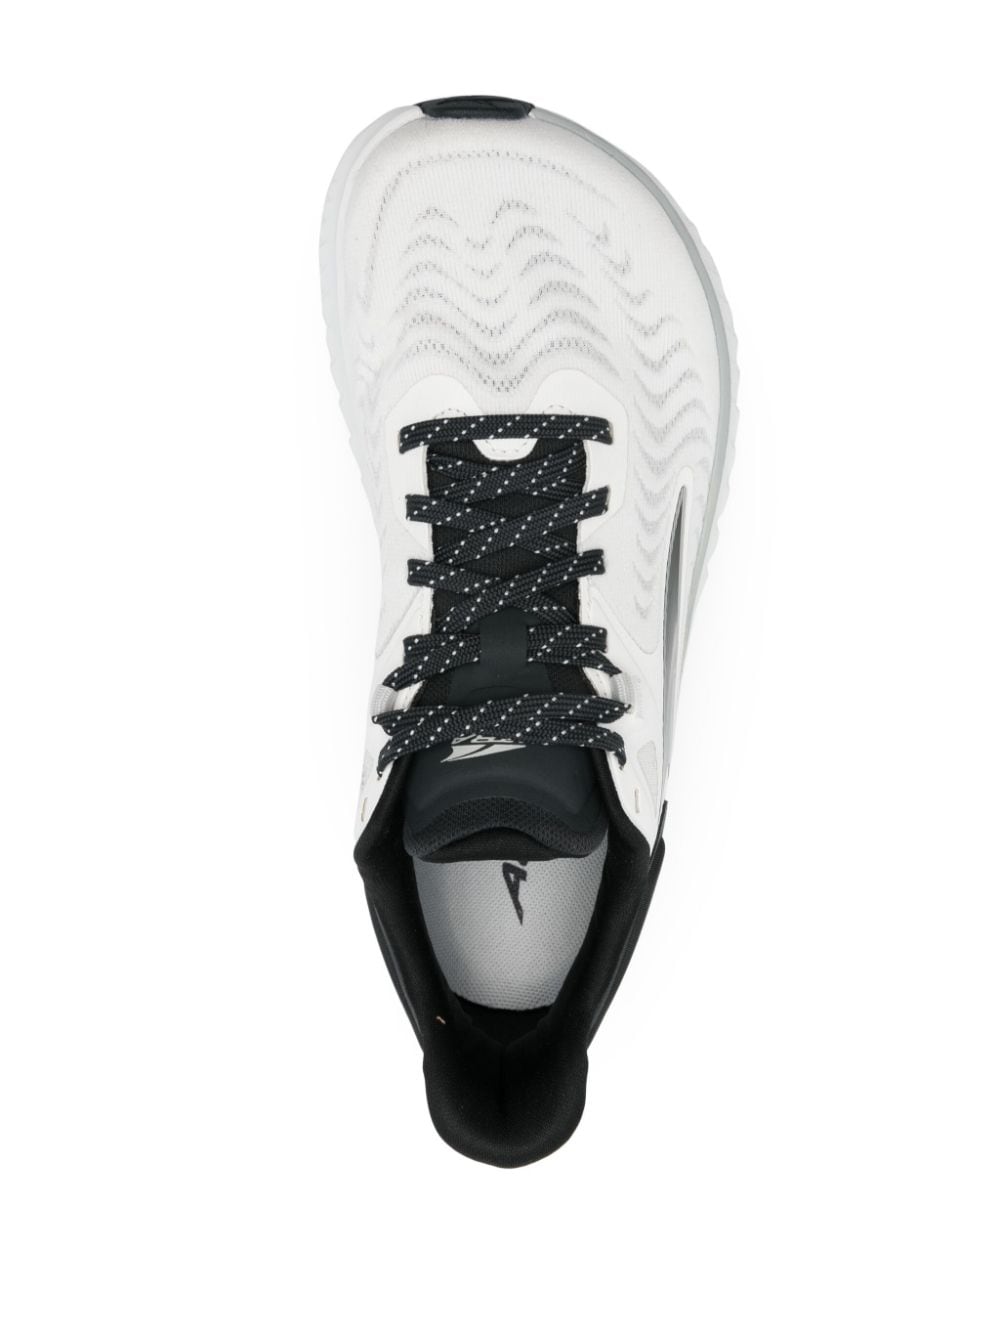 Torin 7 mesh sneakers<BR/><BR/><BR/>